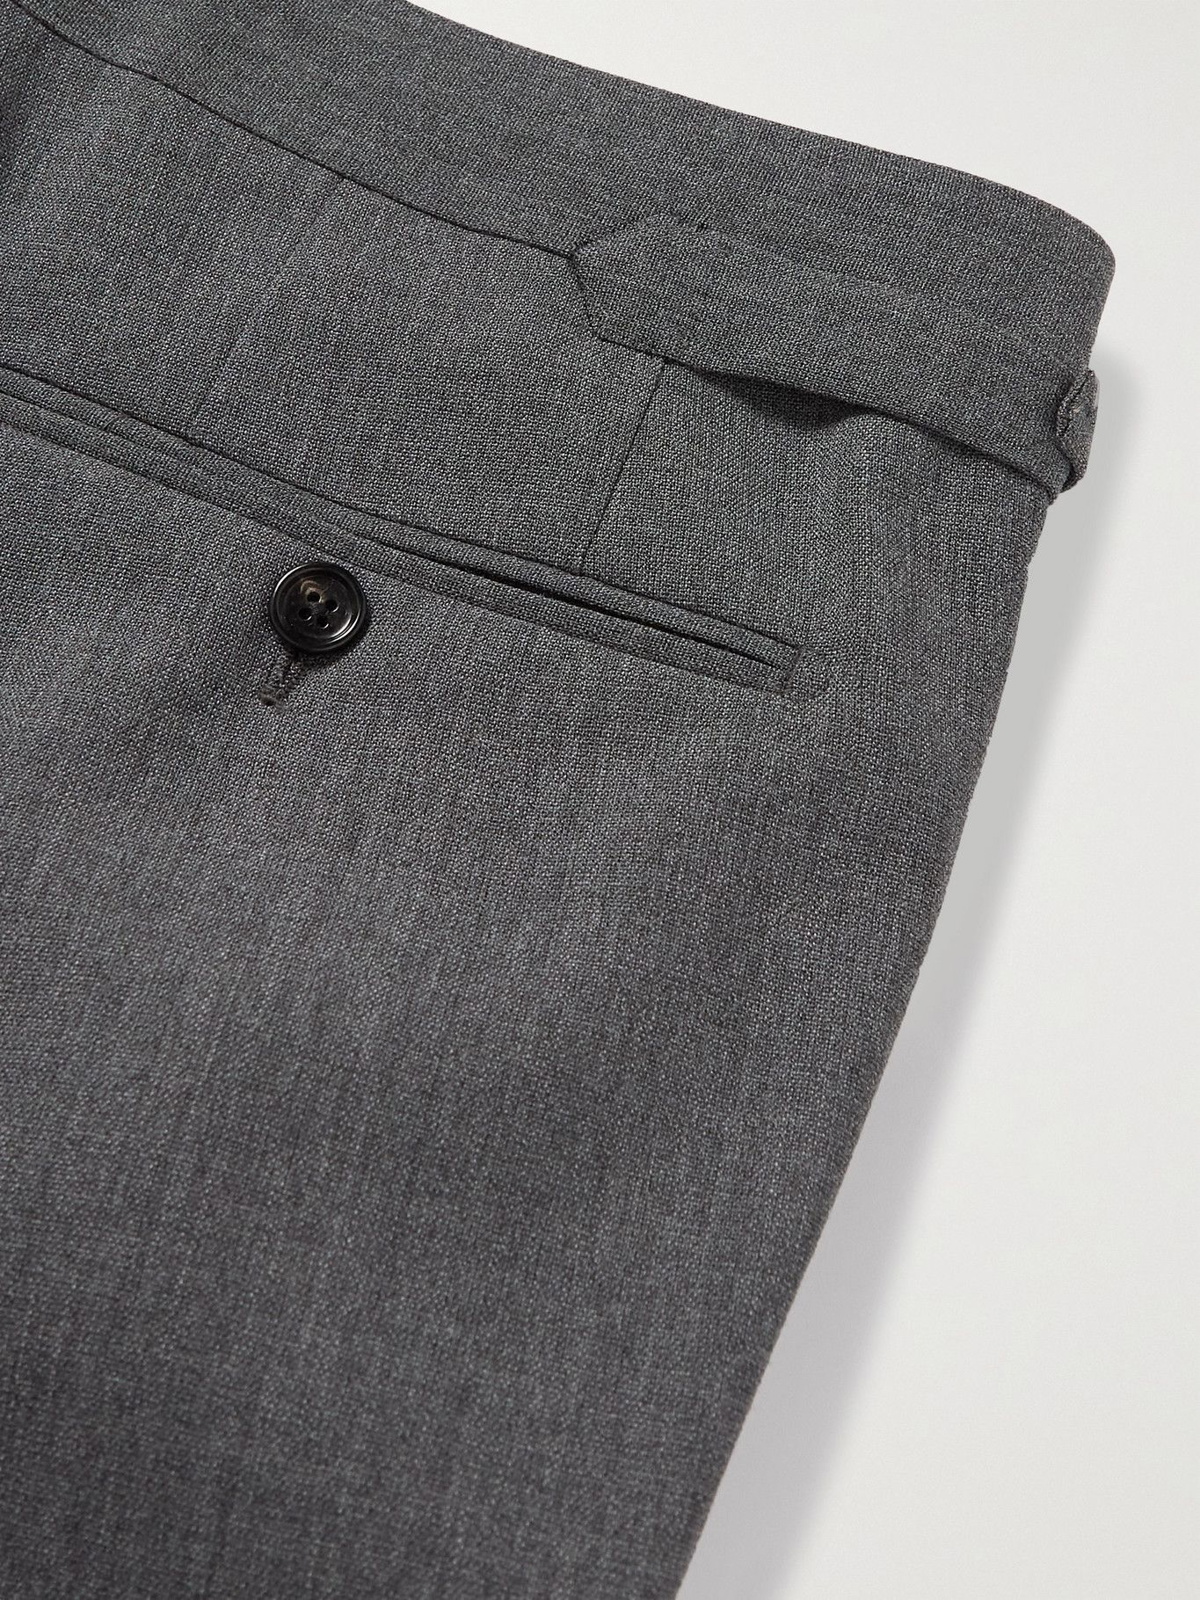 TOM FORD O'Connor Slim-Fit Checked Wool Trousers for Men | MR PORTER